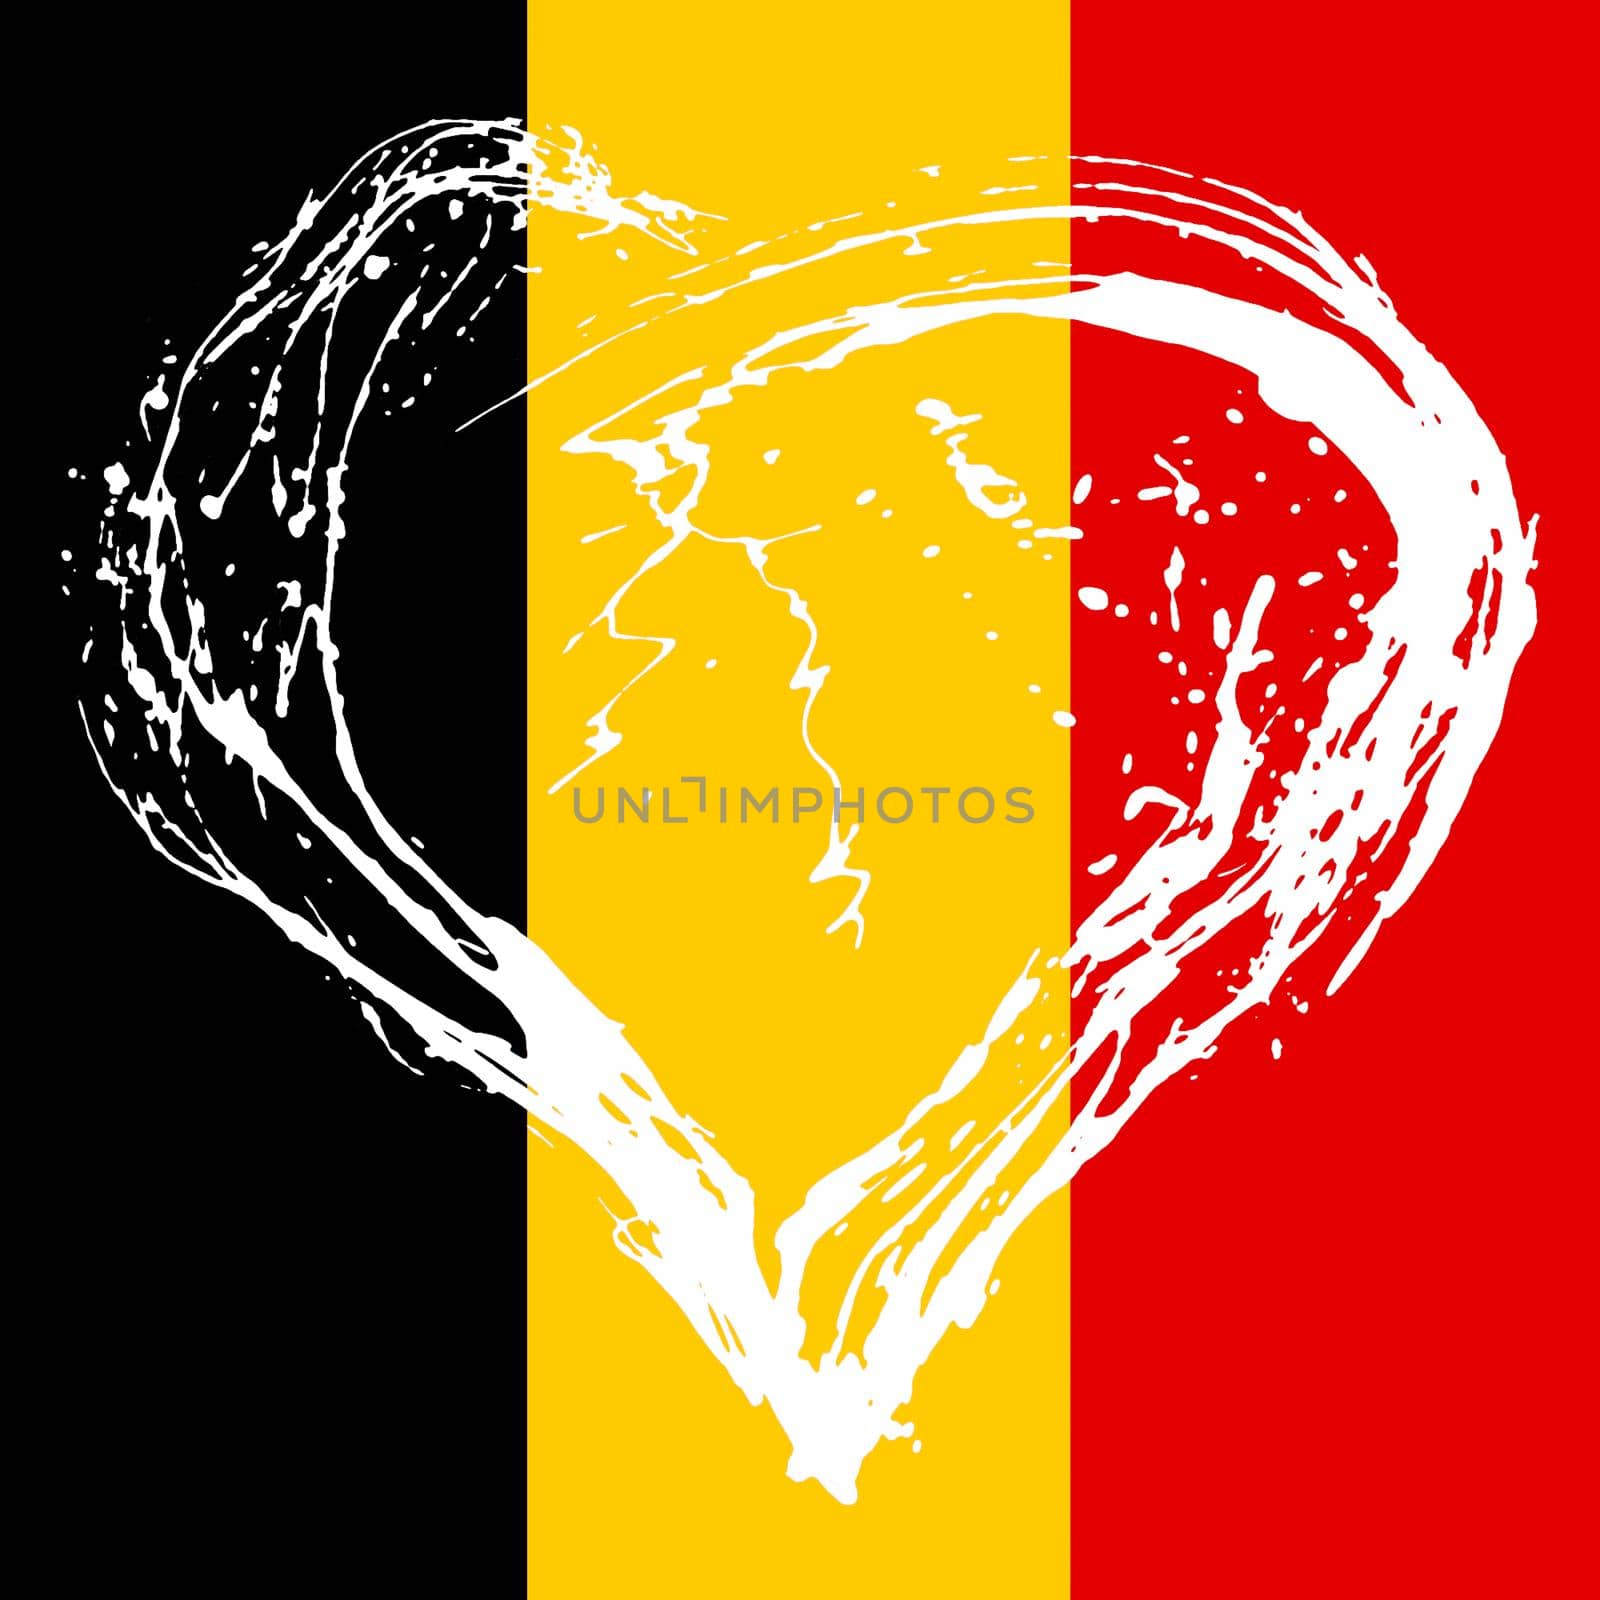 The symbolic image of a broken heart in the colors of the Belgium flag